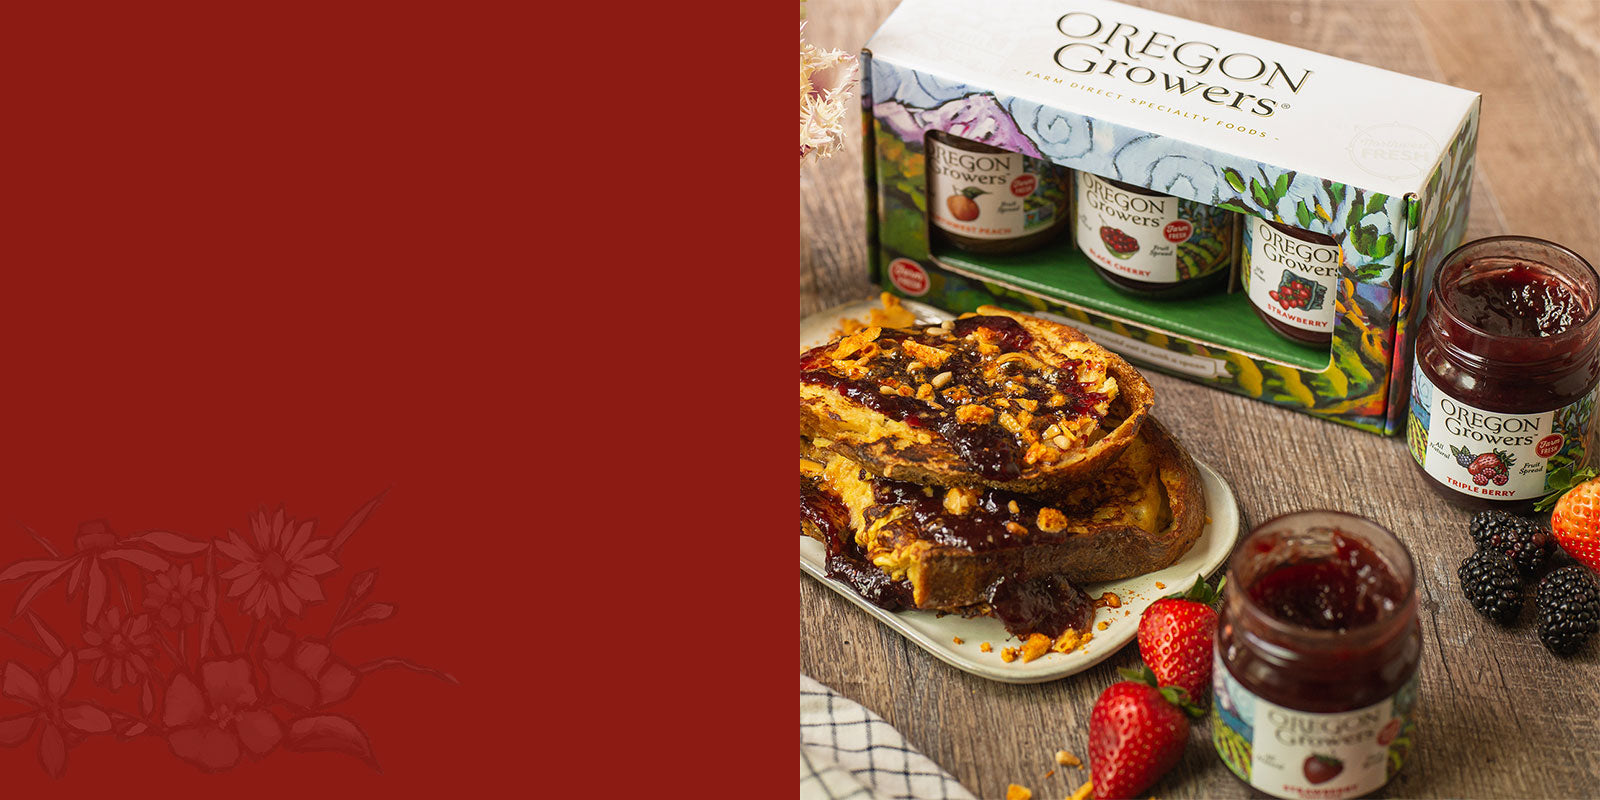 A gift box promotional close-up of our Oregon Berry Gift Trio on a serving board with a plate of toast.